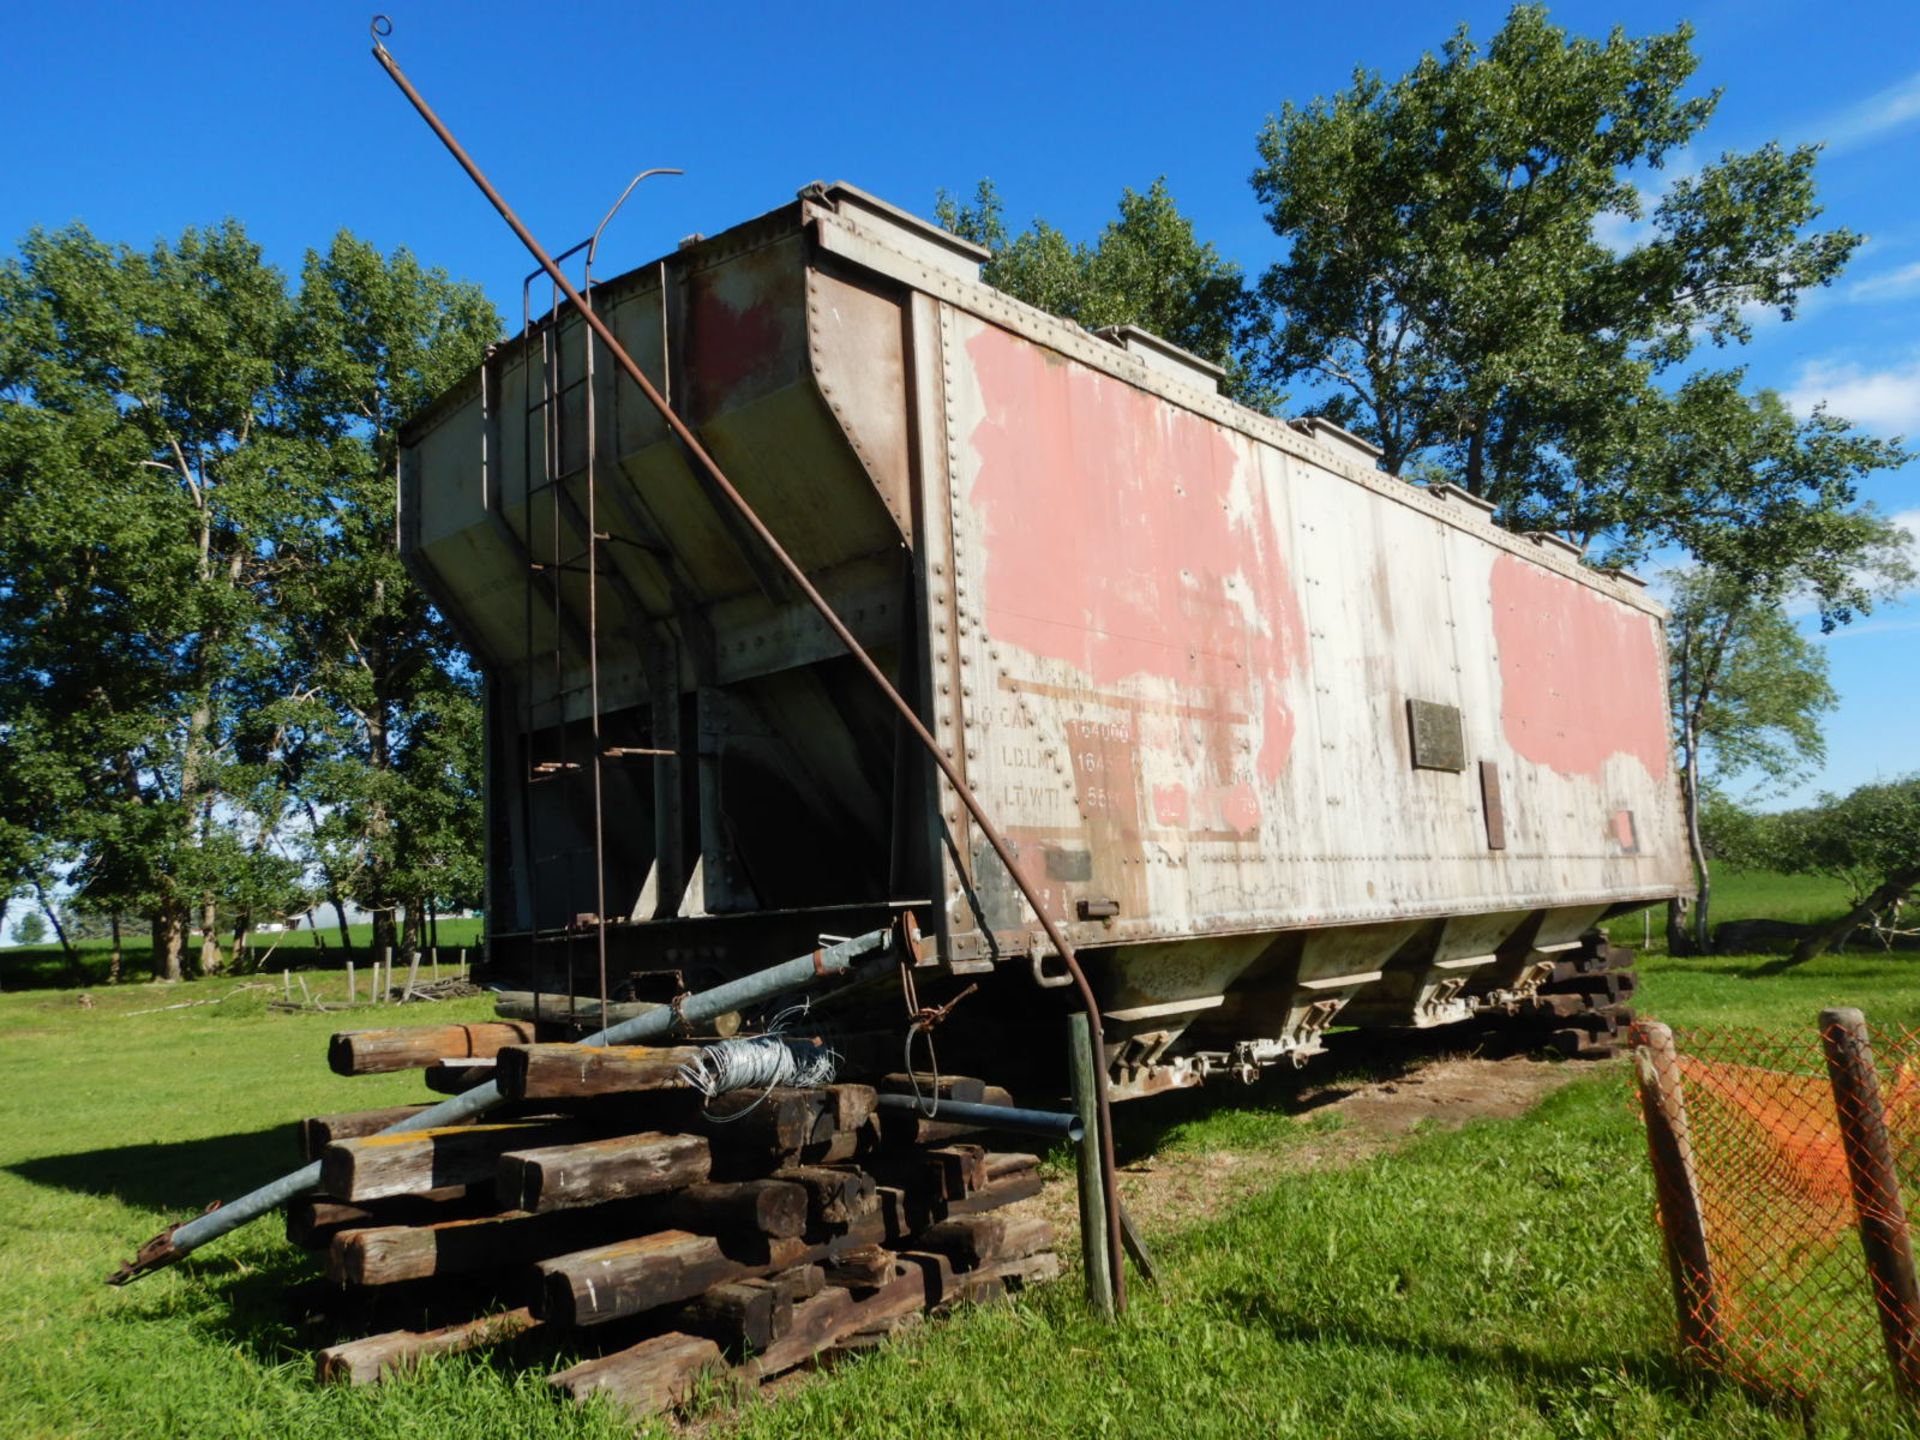 32 FT +- GRAIN HOPPER CAR - NO WHEELS, LOCATED @ 39427 RNG RD 250, LACOMBE COUNTYTO VIEW: CALL TED @